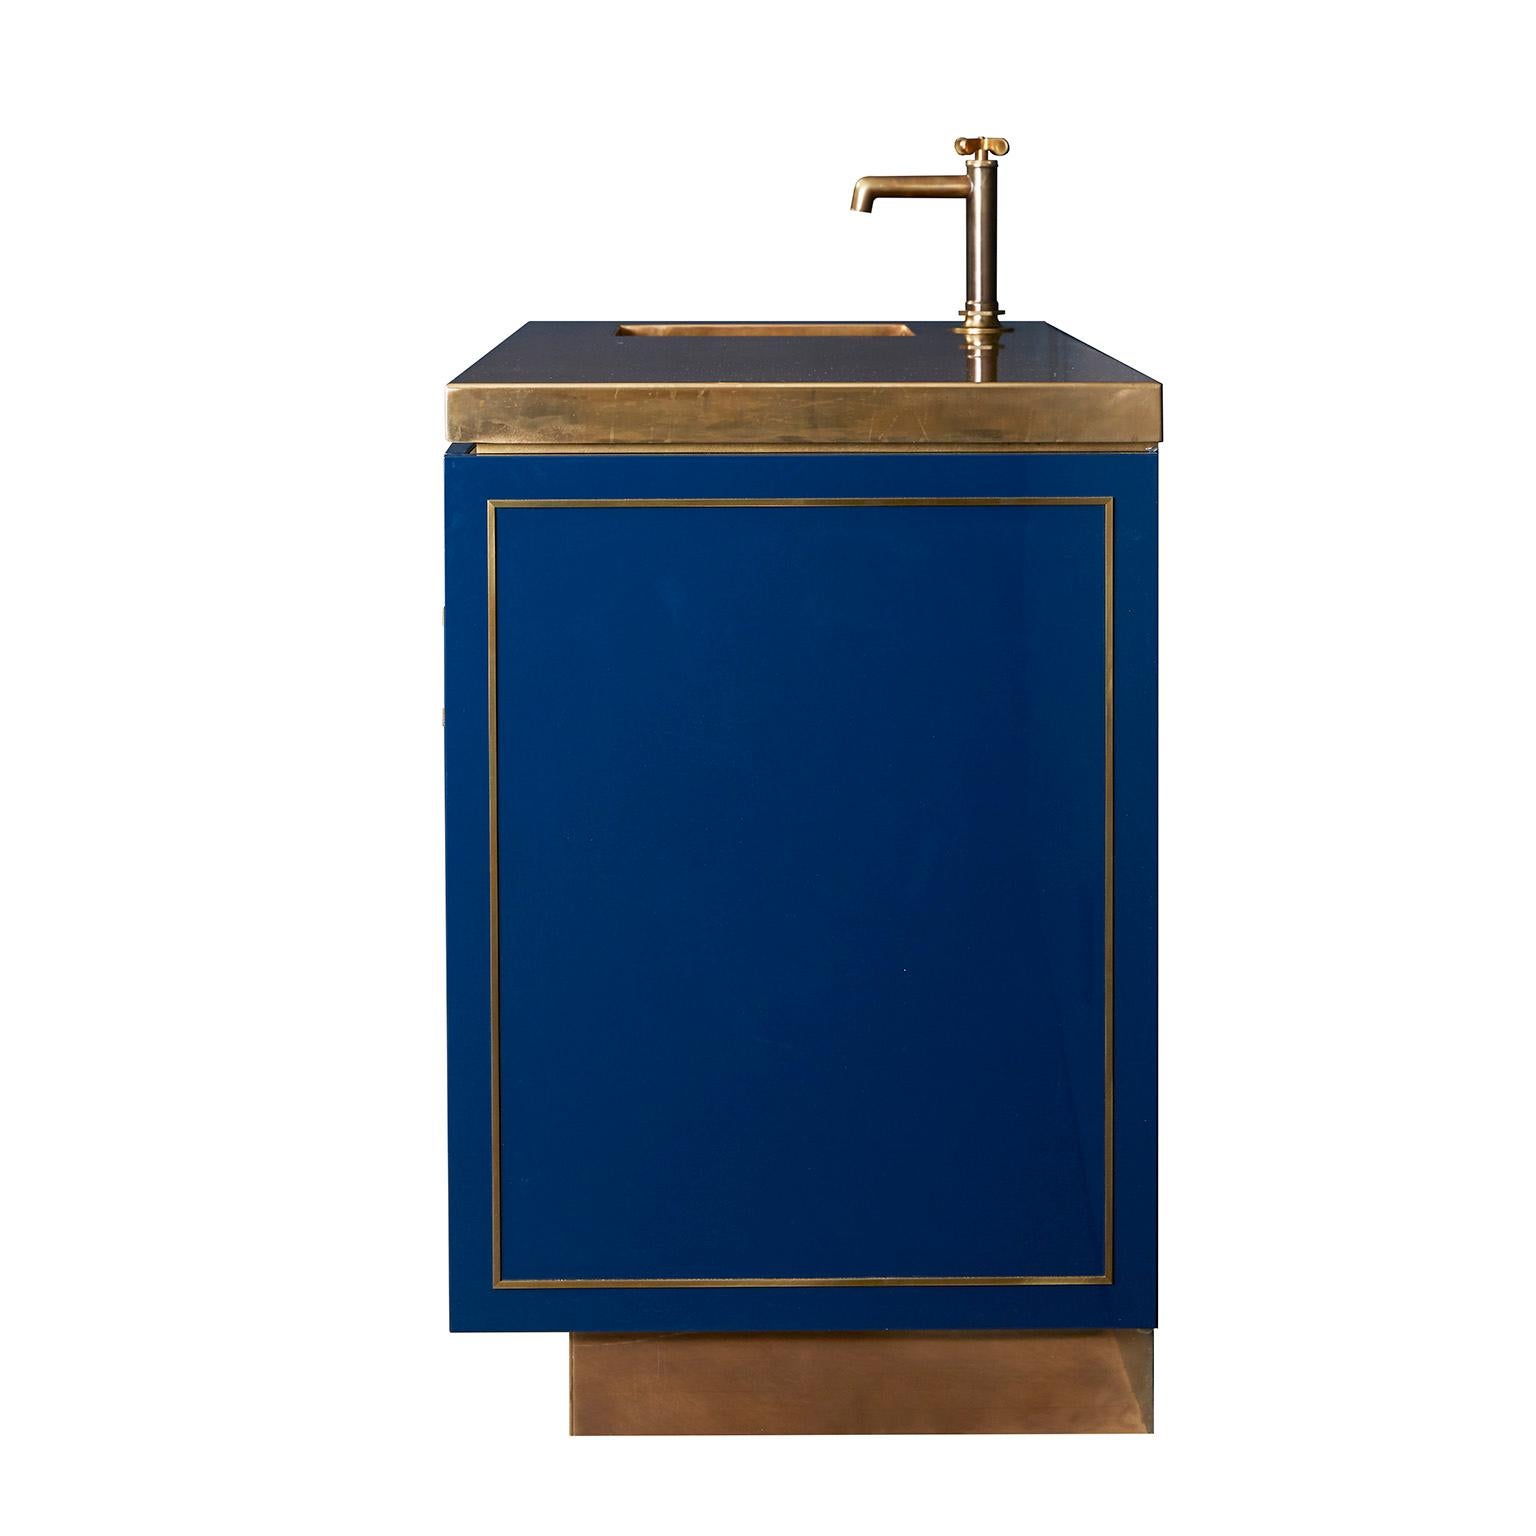 Hand-polished lacquered cabinet doors and drawer faces inlayed with buffed brass and integral pulls create a modern, tailored statement. The composition of the lower cabinet is set off against a polished and patinated brass counter, which brings a